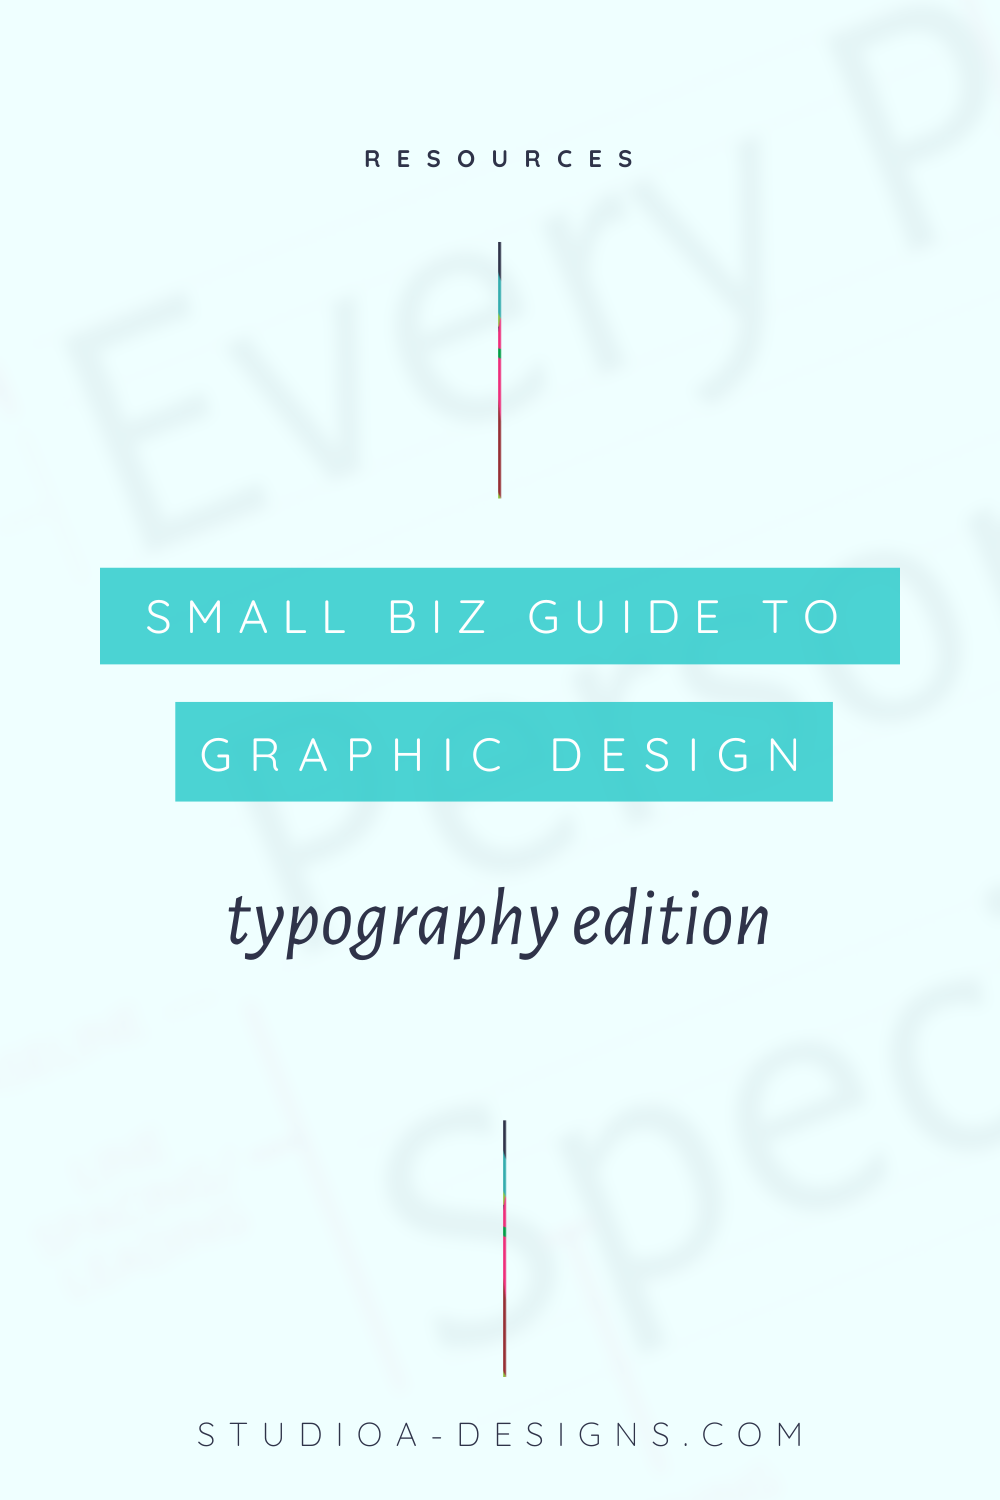 Small Biz Guide to Graphic Design, Typography Edition